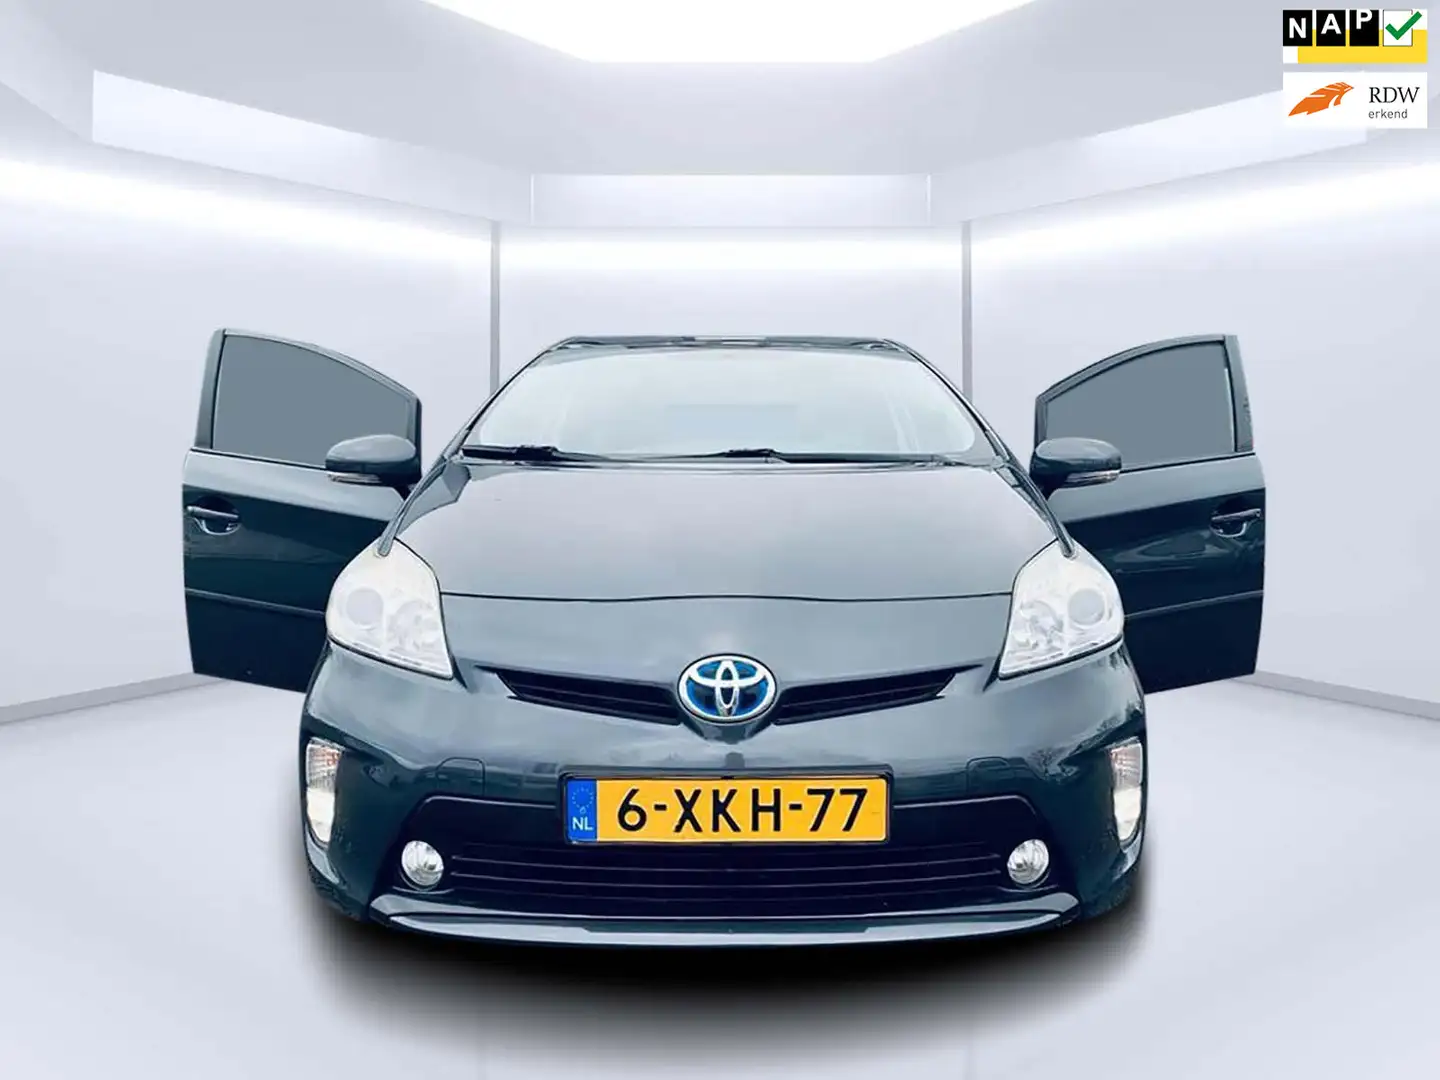 Toyota Prius 1.8 Comfort Top 5 edition, KM 77300 NAP, Cruise Co Grey - 1